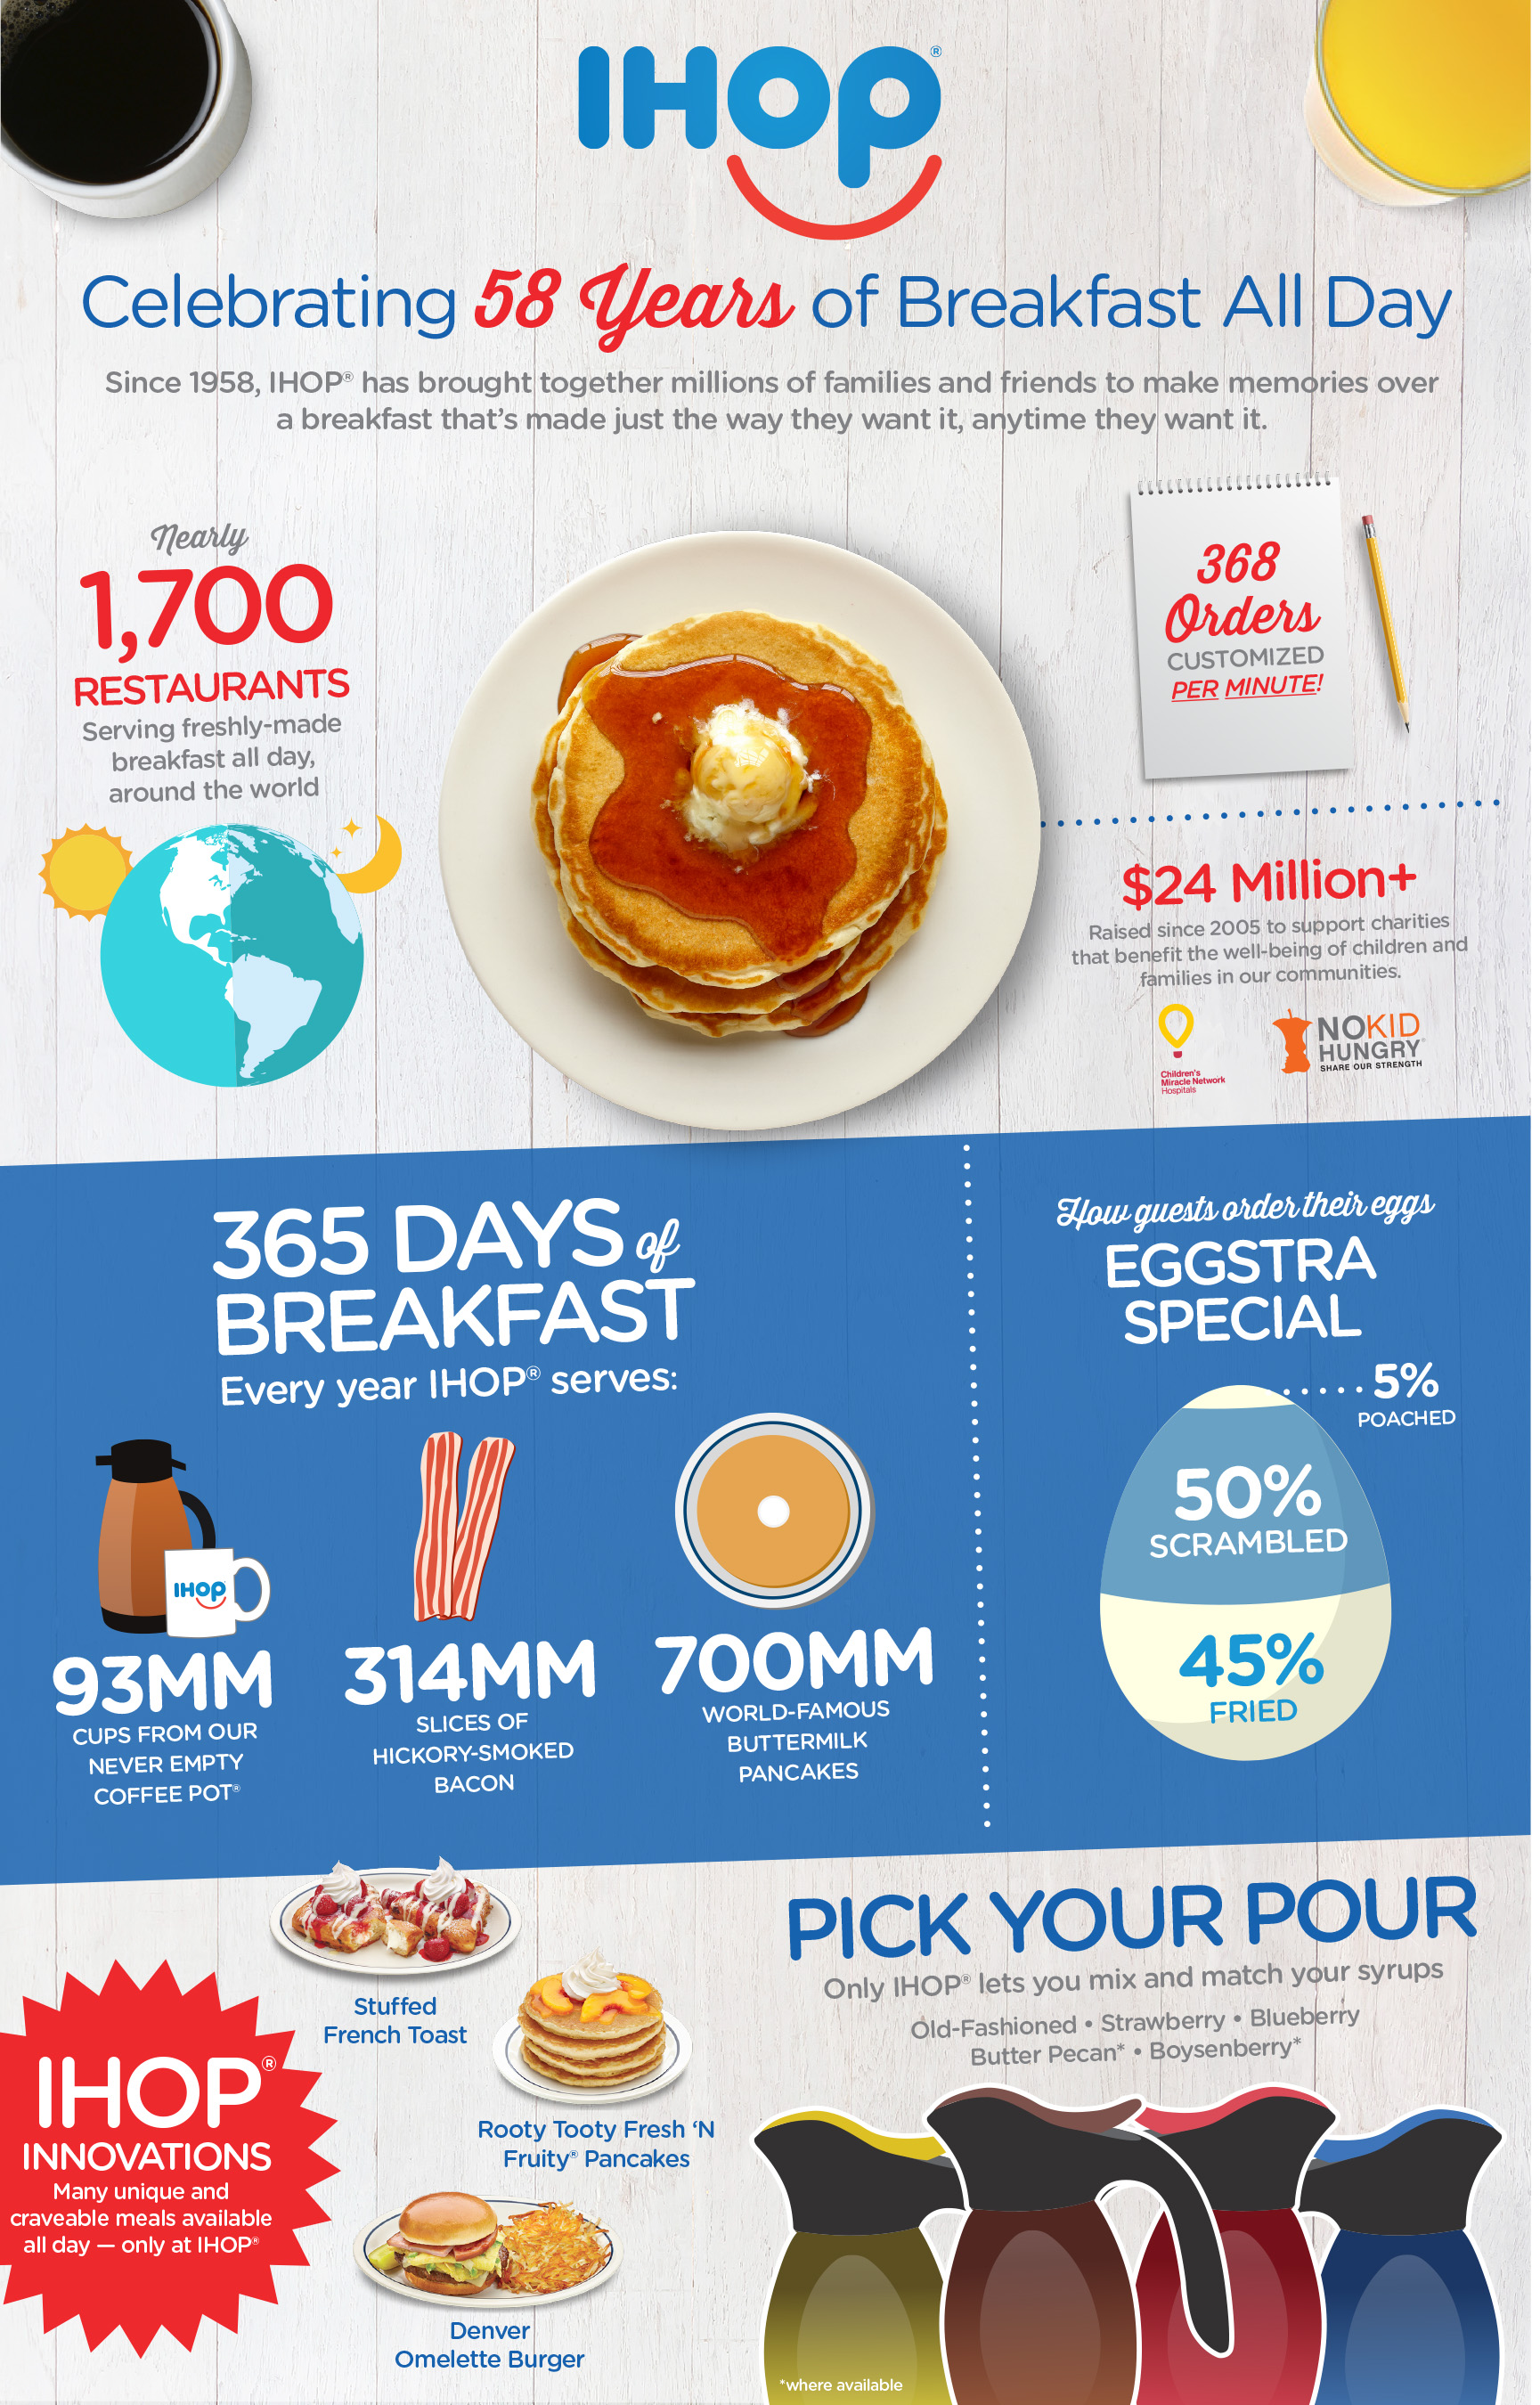 Since 1958, IHOP has created memories by bringing guests together for a REAL breakfast, made your way, anytime of day, every day.